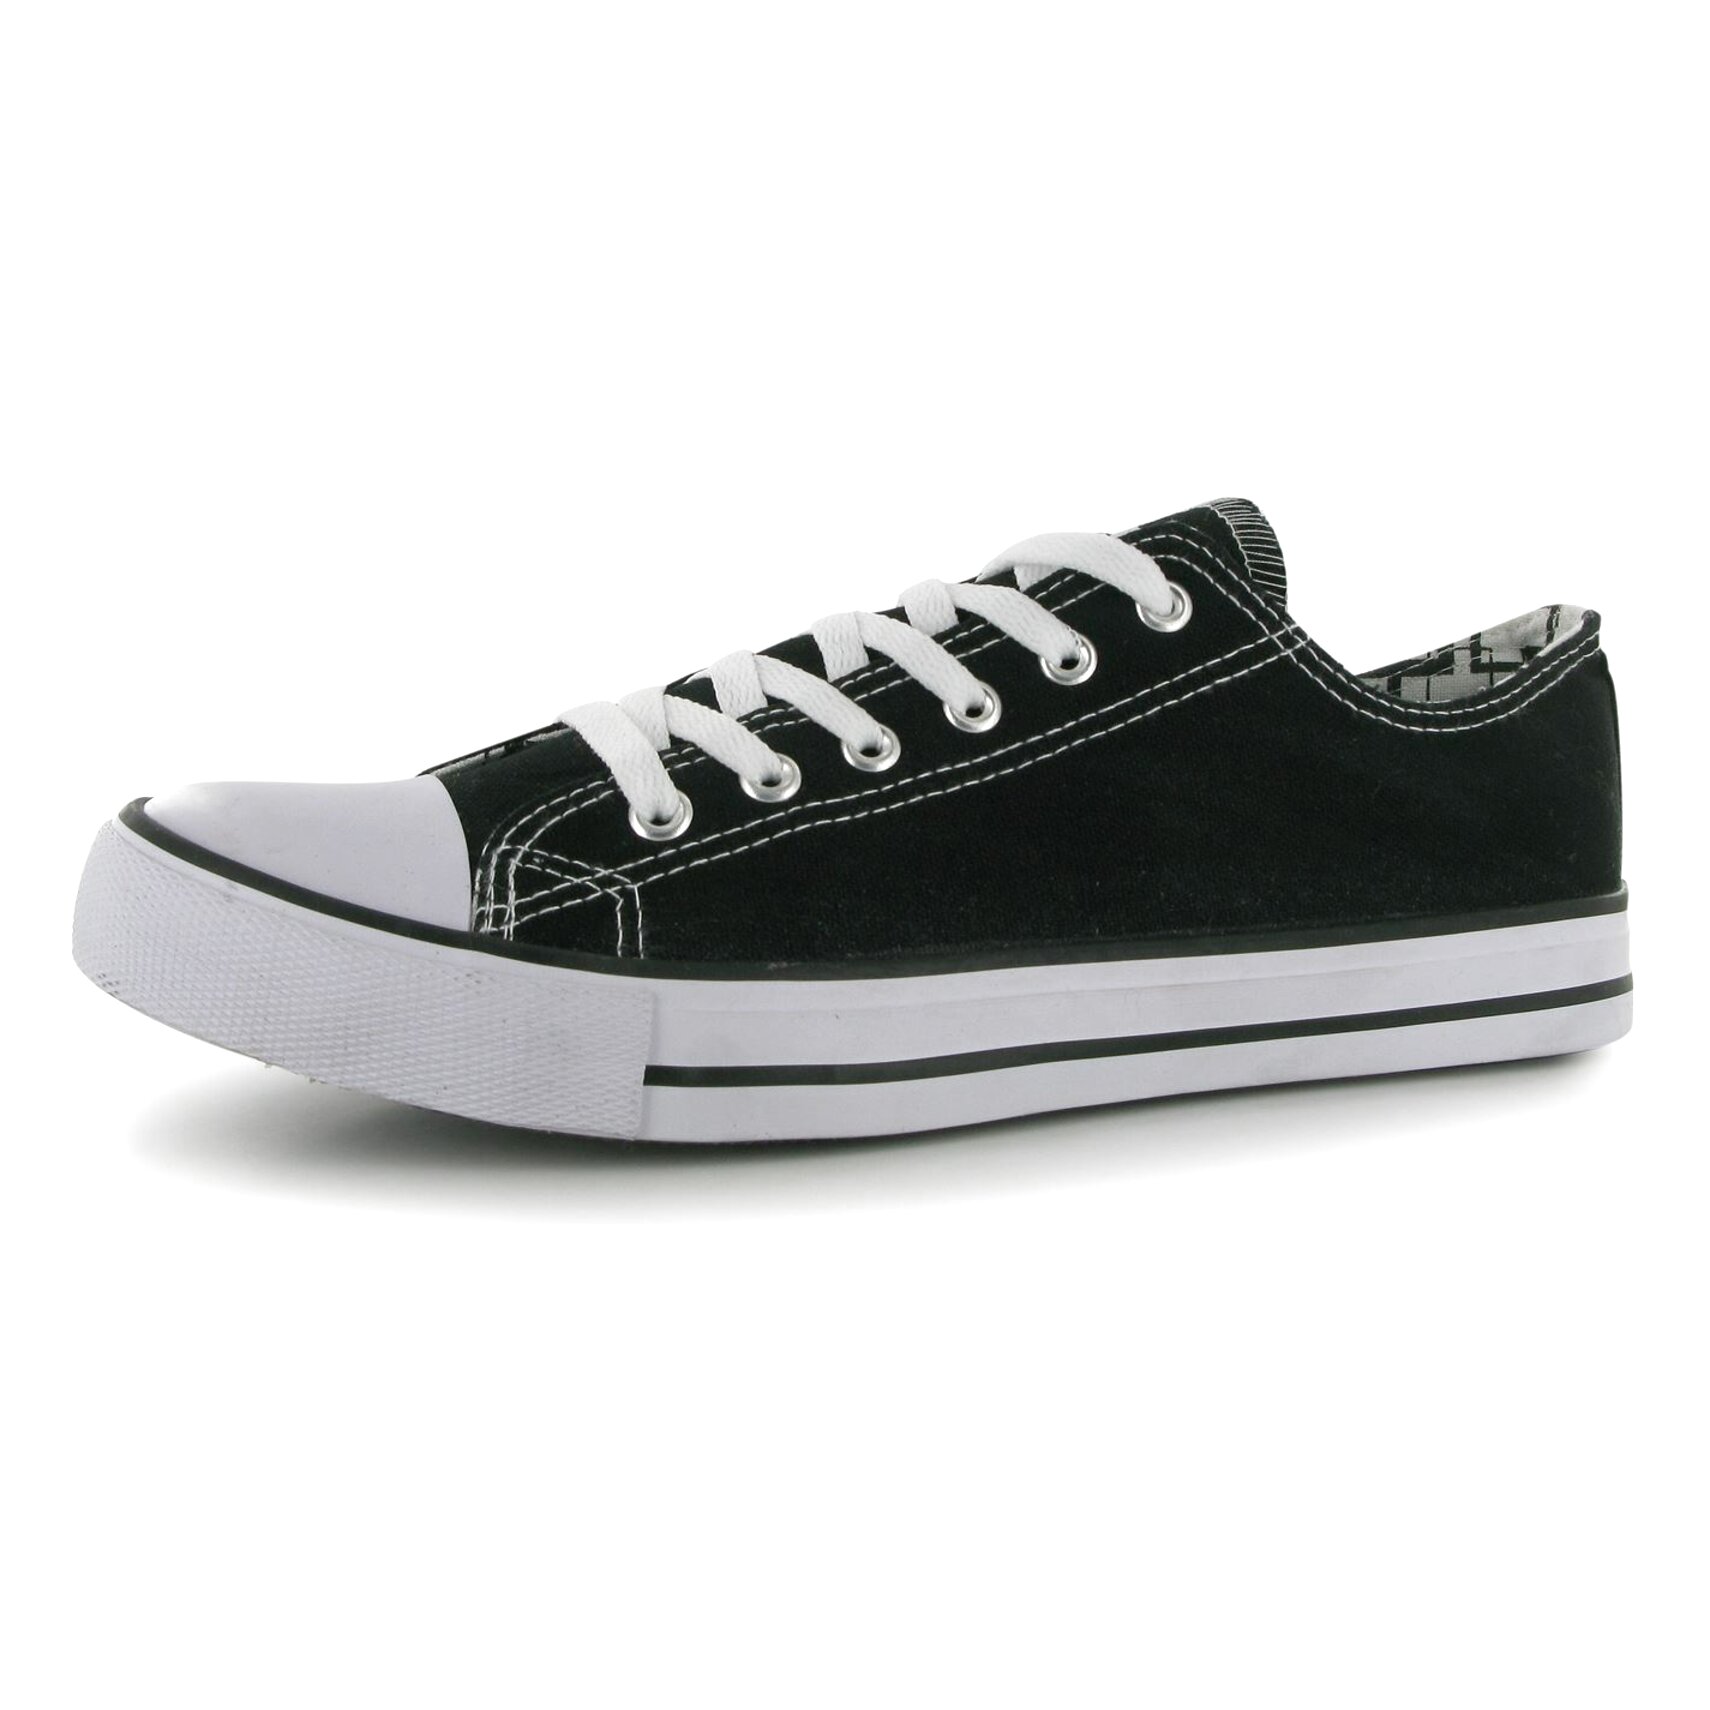 Lee Cooper Canvas Shoes for sale in UK | 50 used Lee Cooper Canvas Shoes